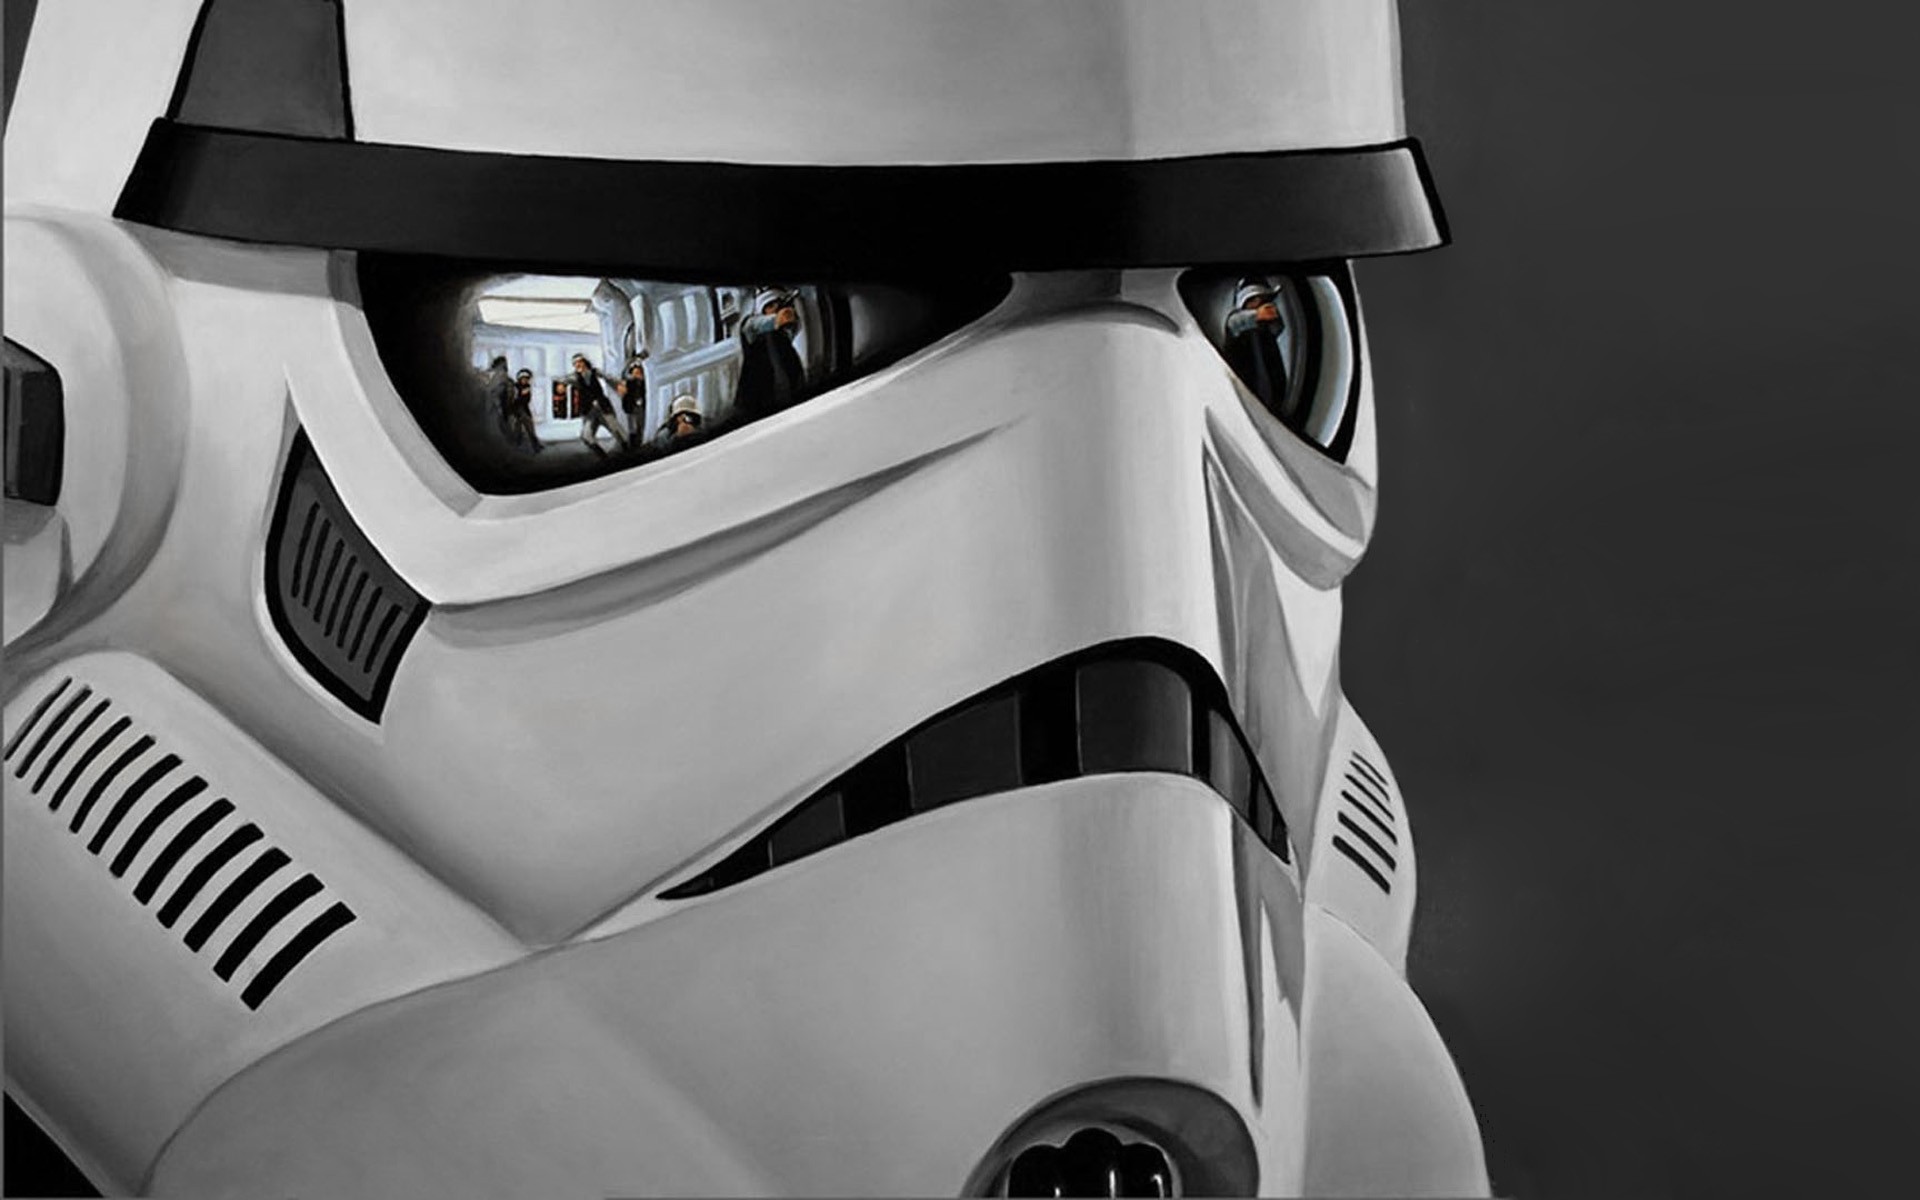 Star Wars Stormtrooper Imperial Forces Helmet Reflection Galactic Empire 1920x1200